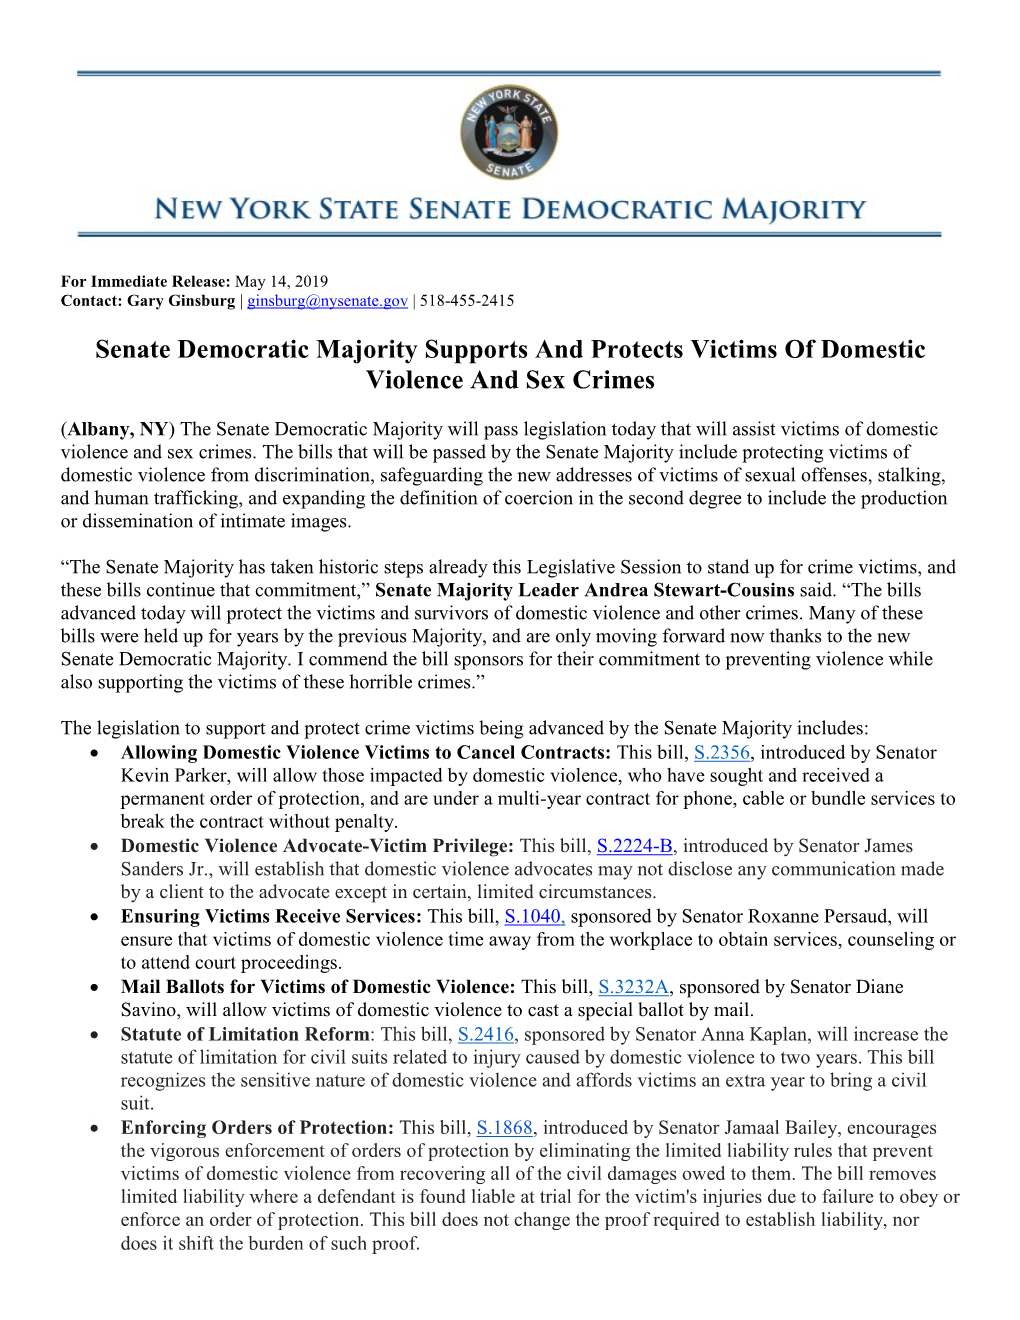 Senate Democratic Majority Supports and Protects Victims of Domestic Violence and Sex Crimes